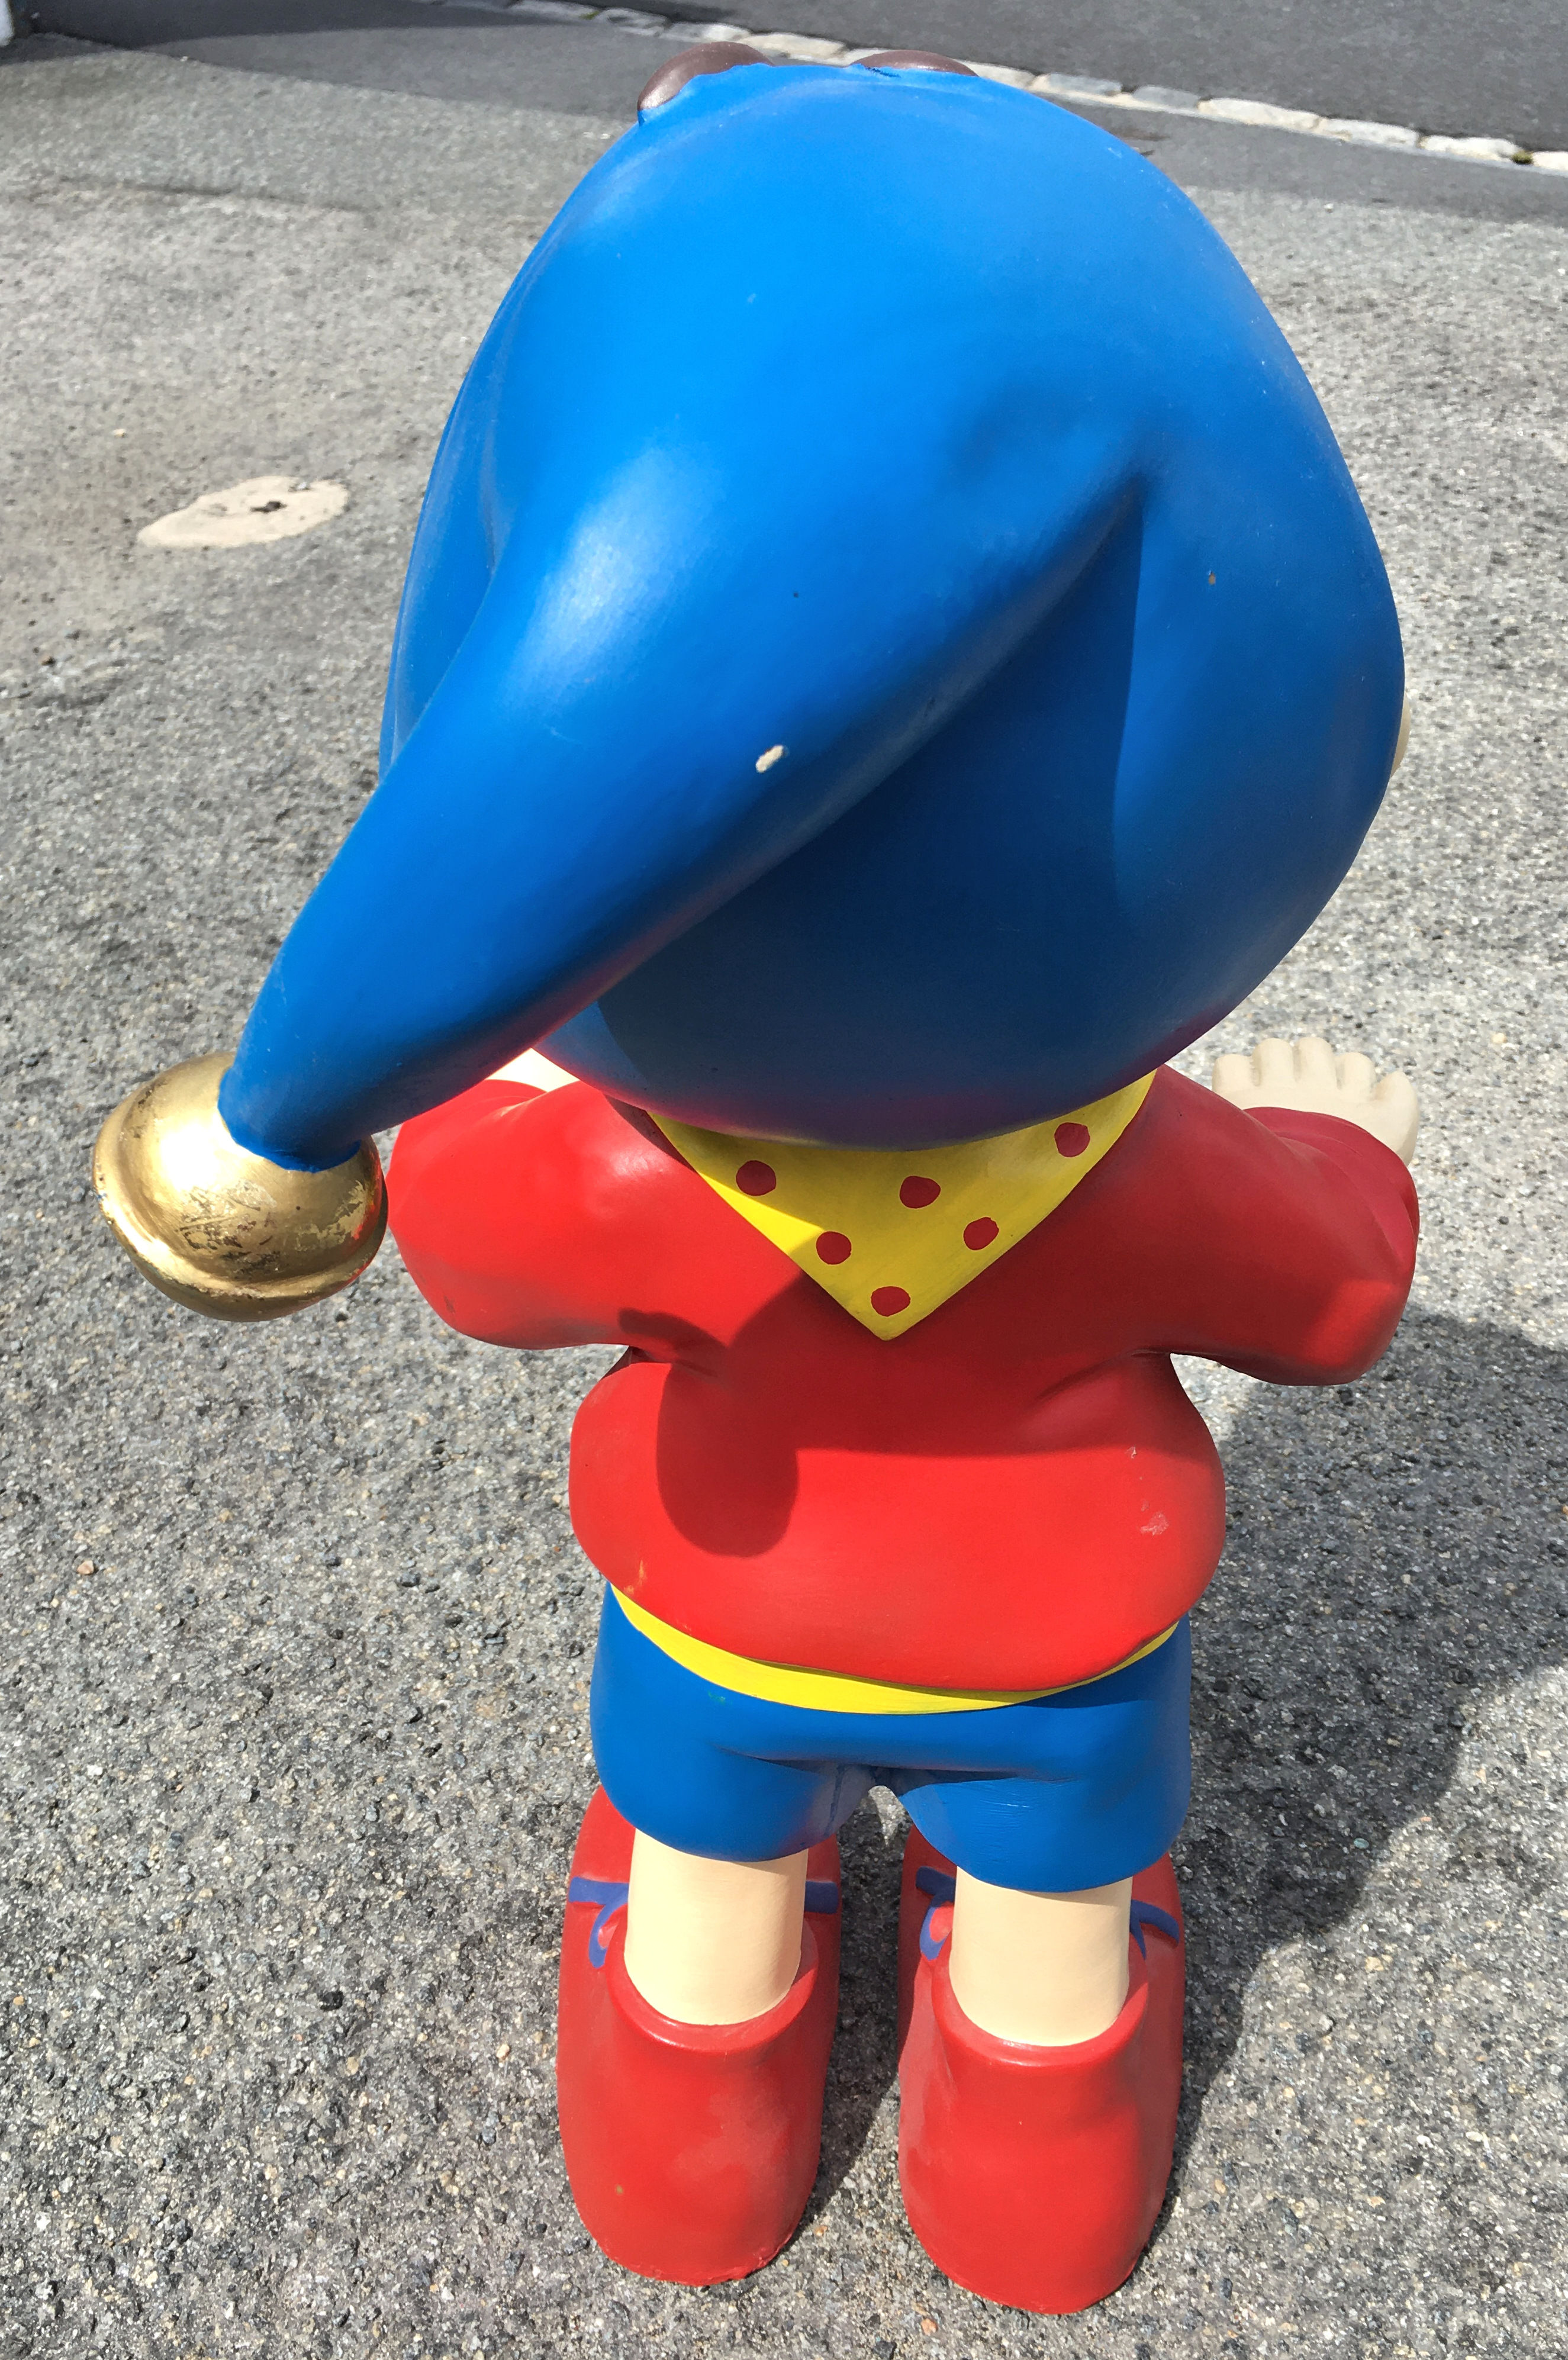 A vintage Noddy shop display figure, in fibreglass, standing 24in. (61cm.) high. - Image 5 of 5